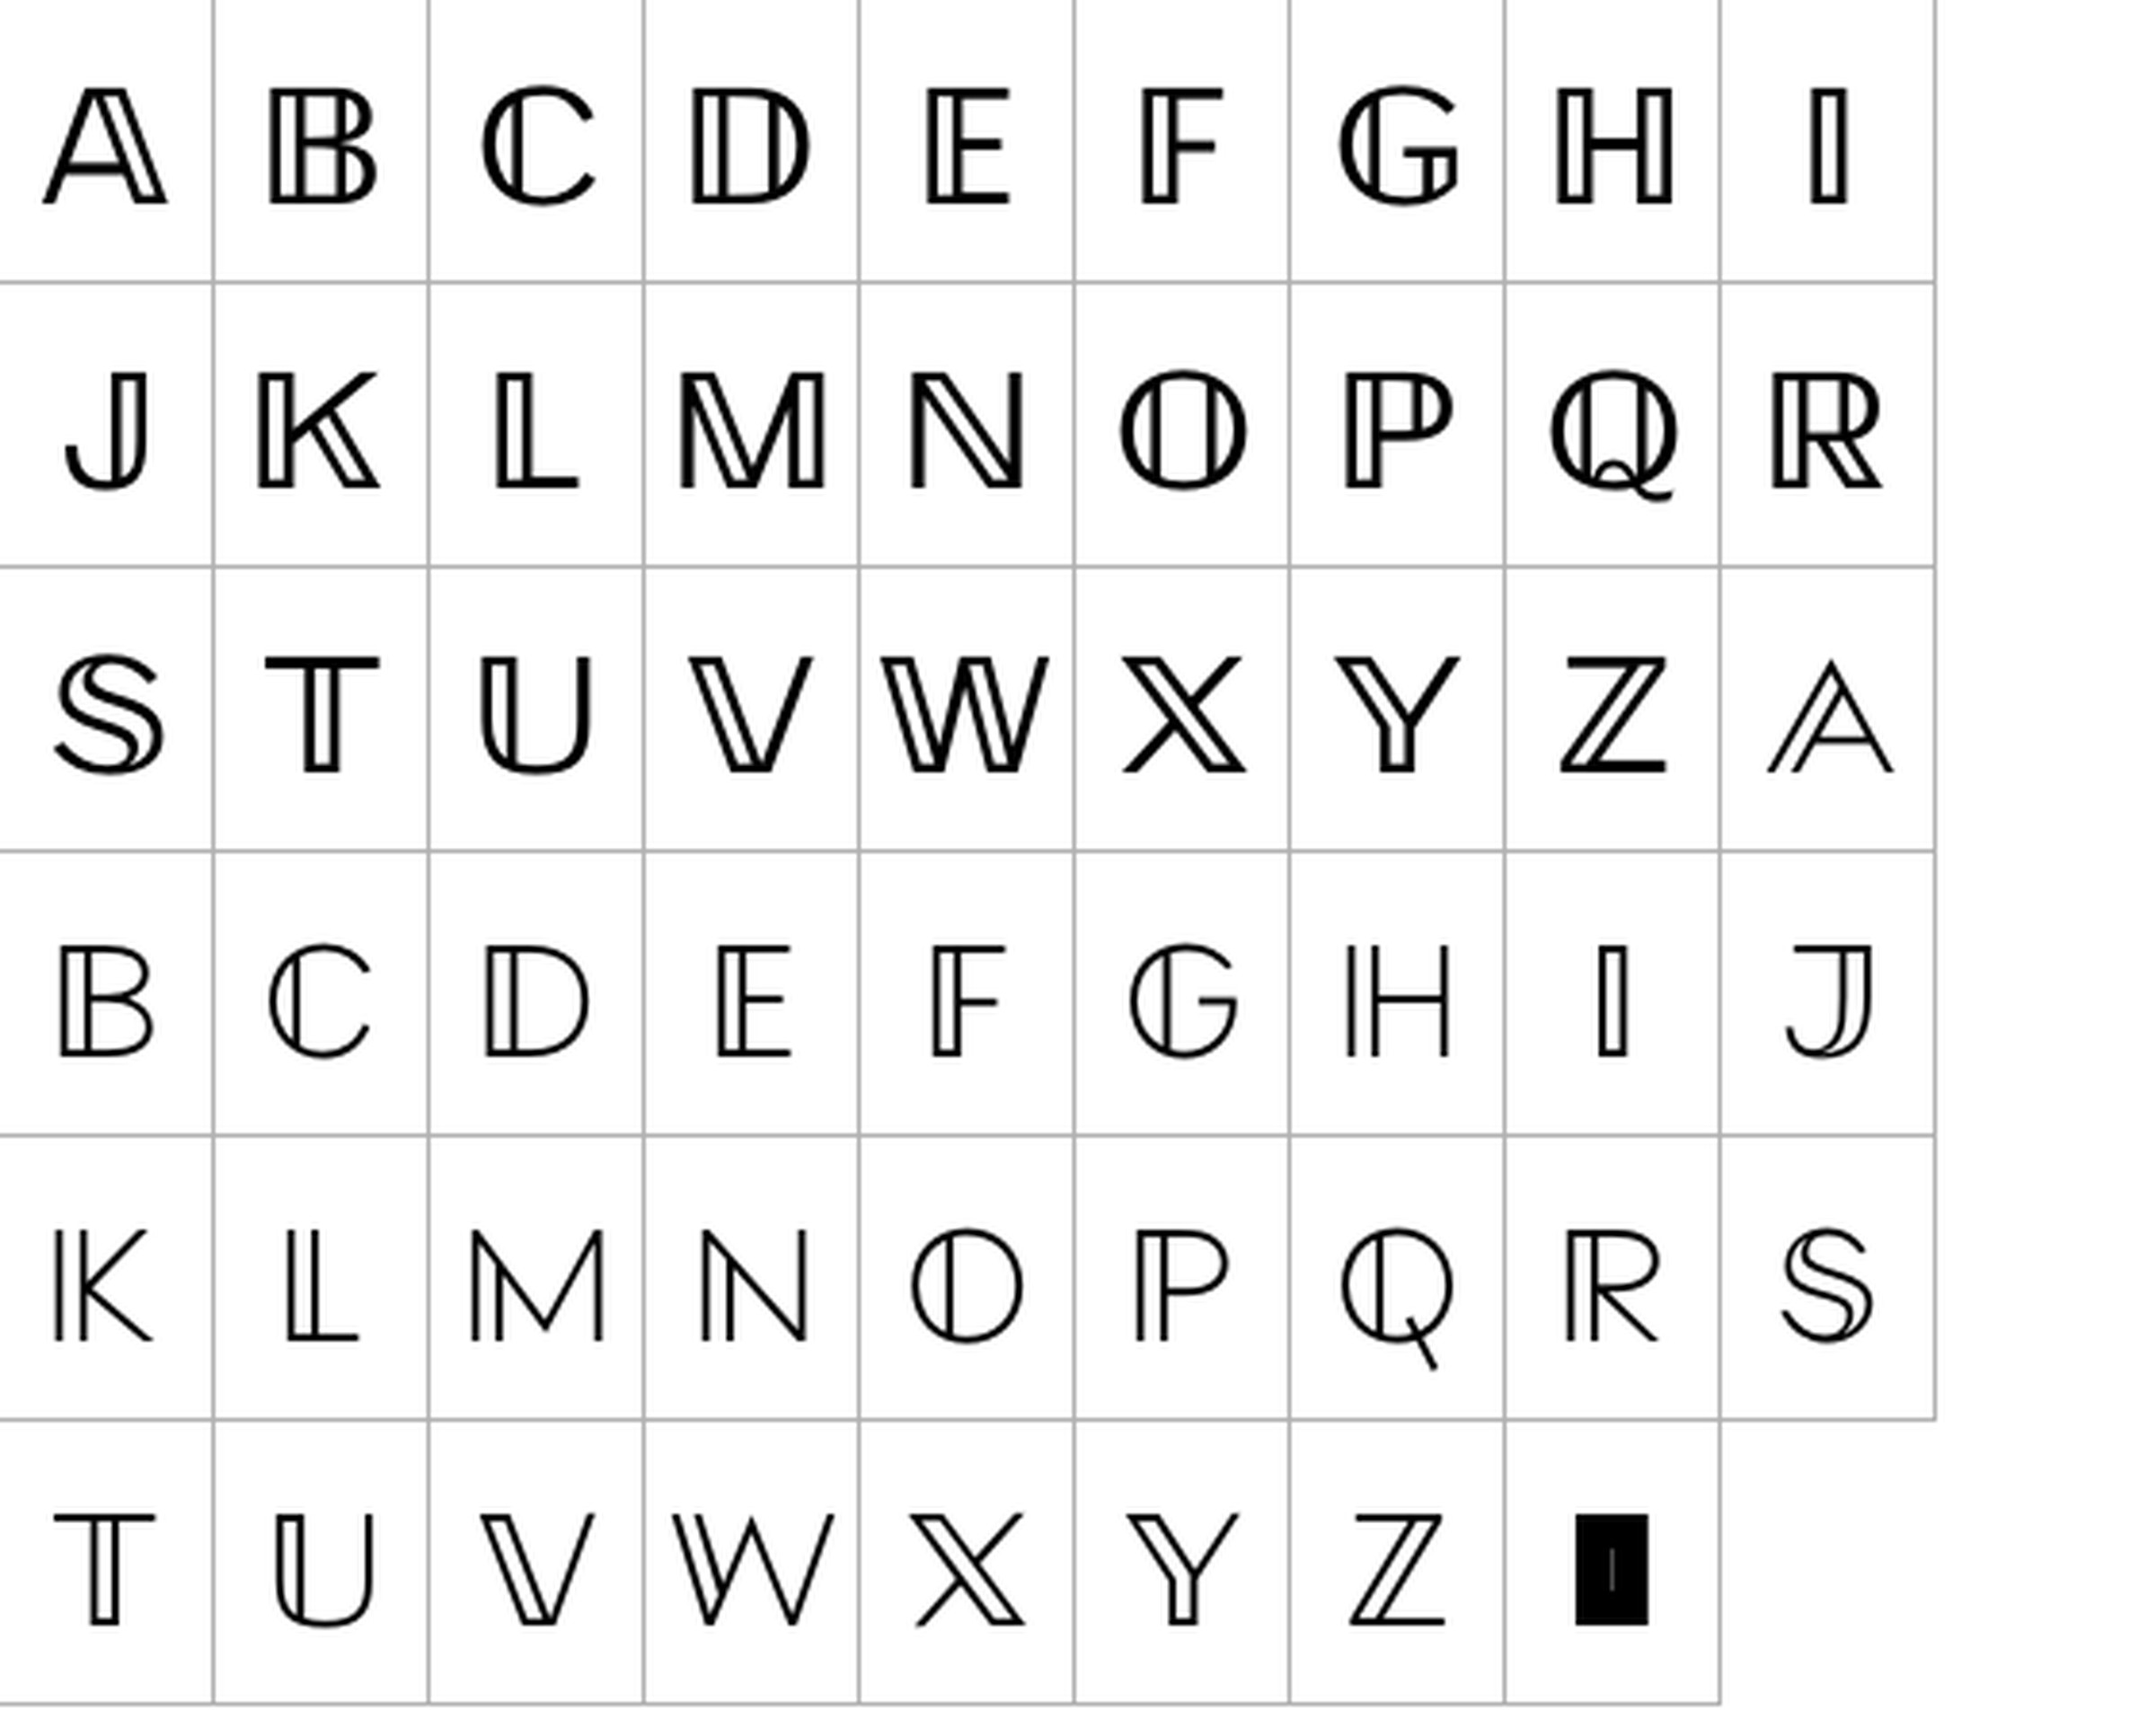 Here’s what the “X” glyph looks like in the upper-case and lower-case versions of Special Alphabets 4.